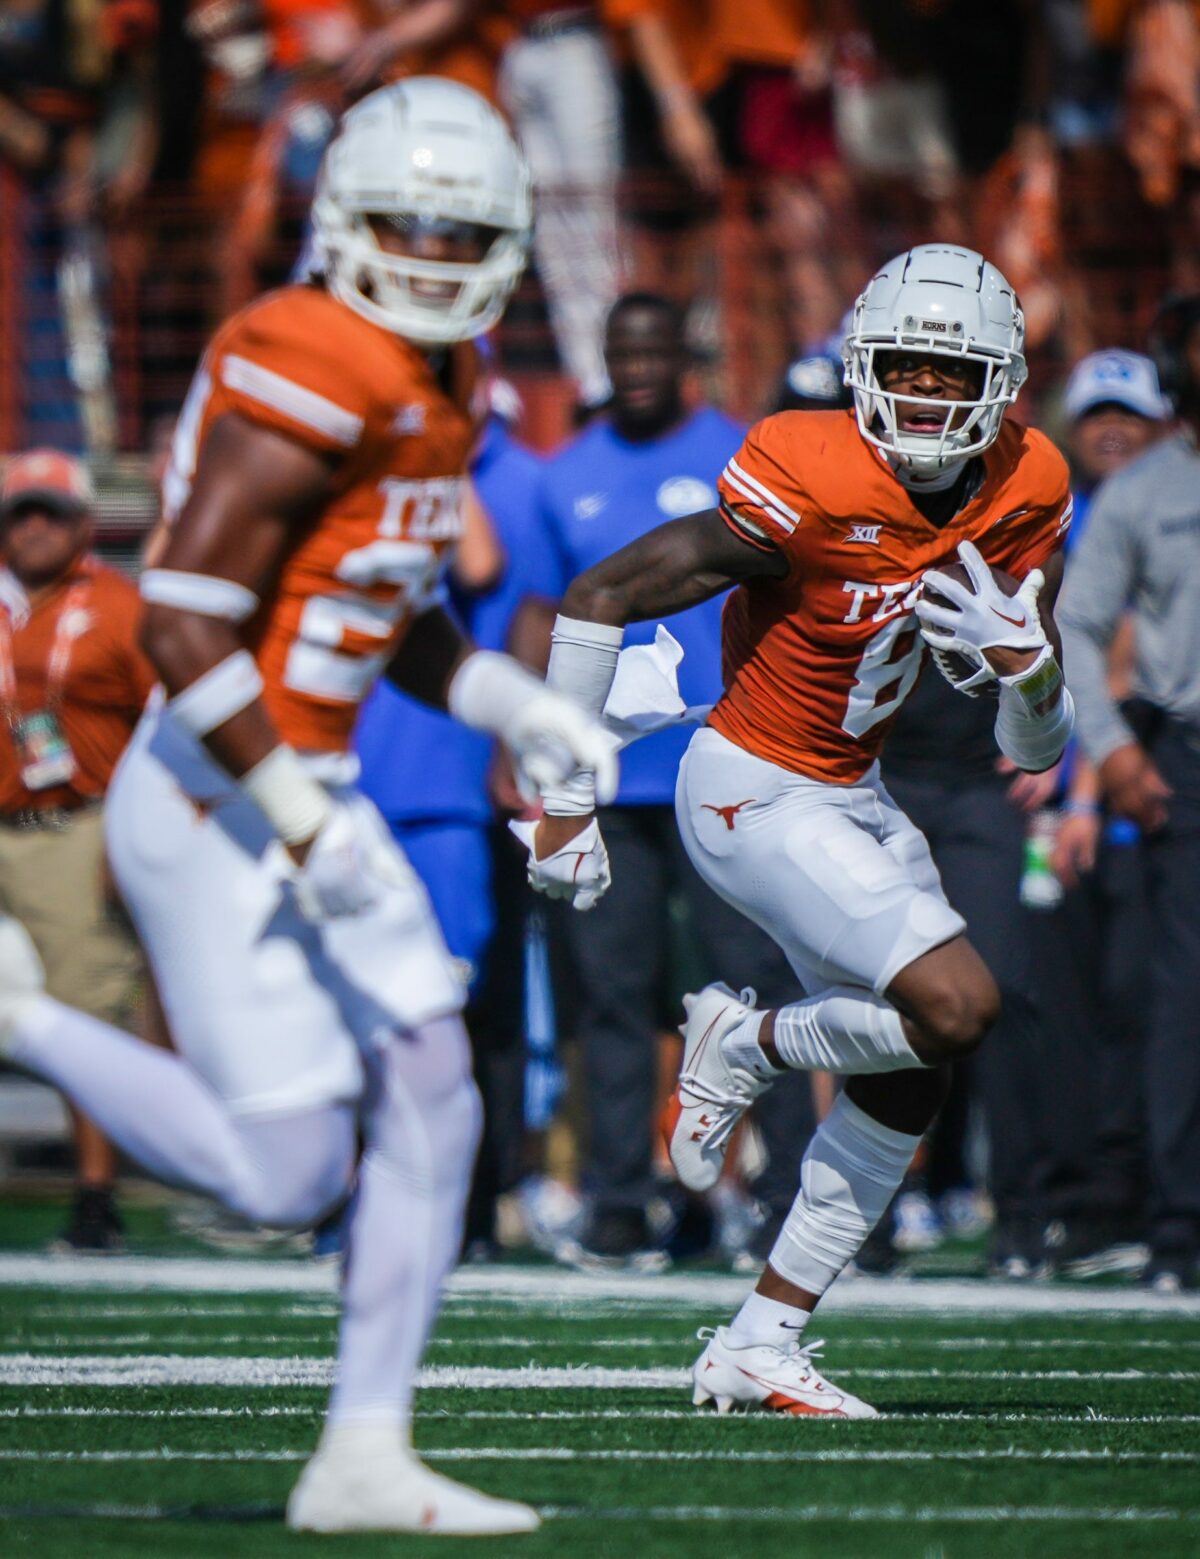 By the numbers: No. 7 Texas routs BYU in stellar performance by the defense